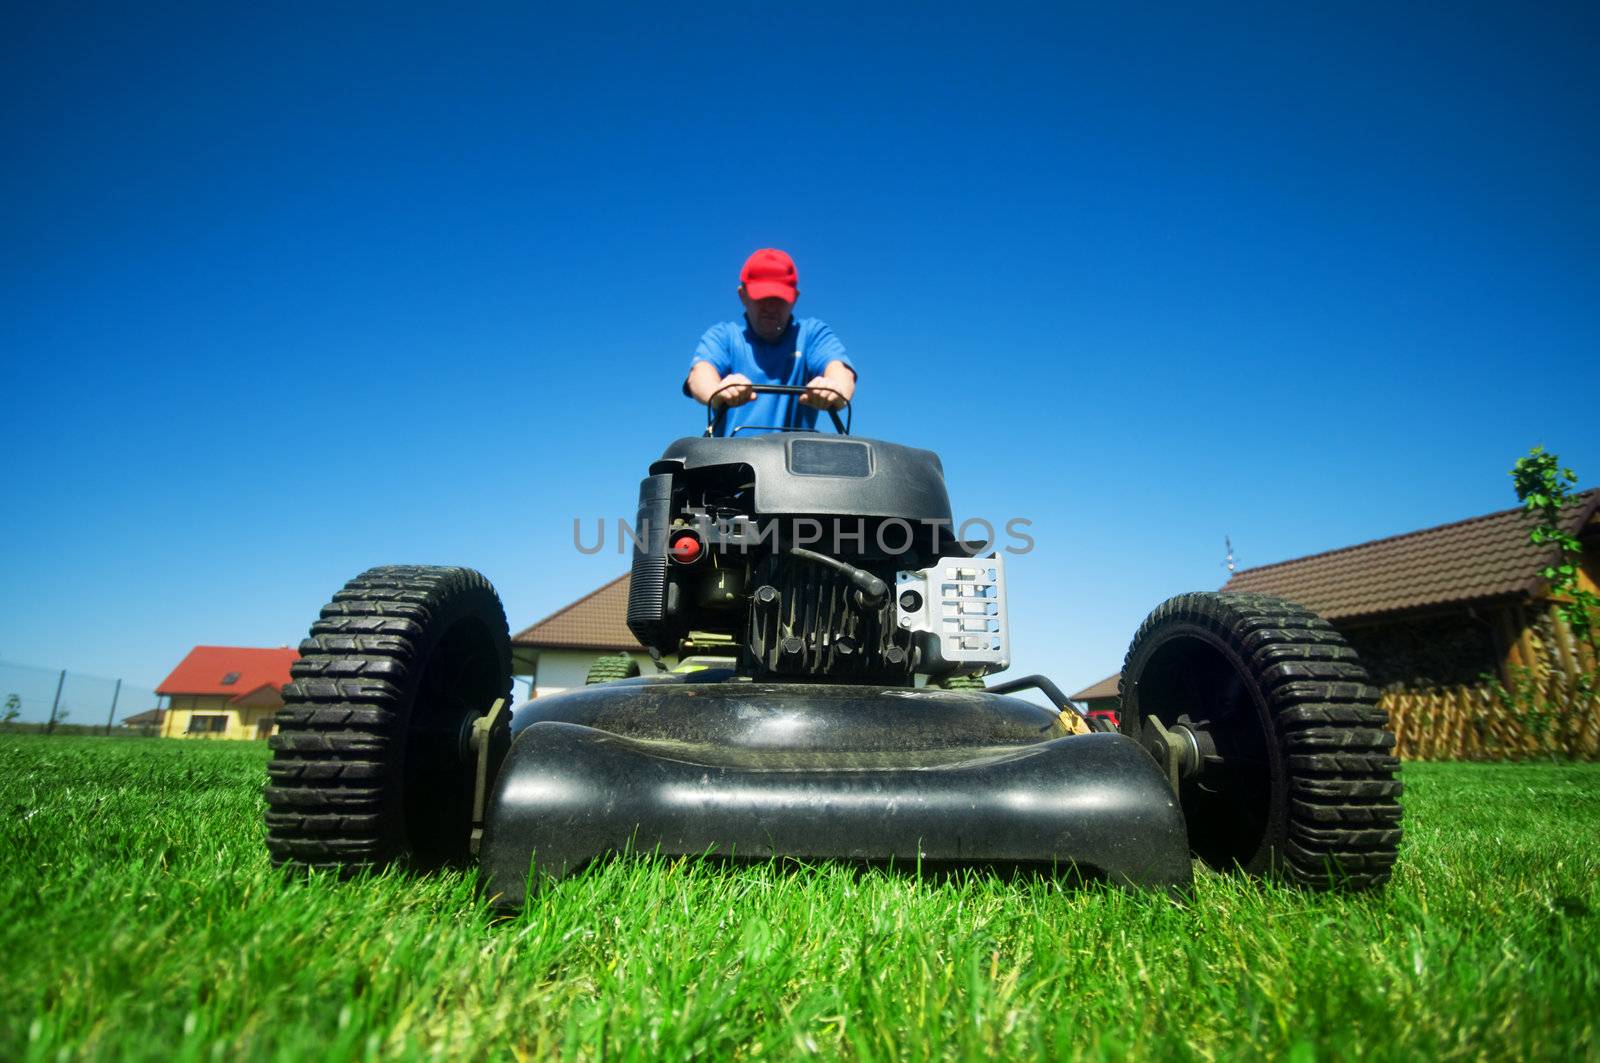 Mowing the lawn by photocreo